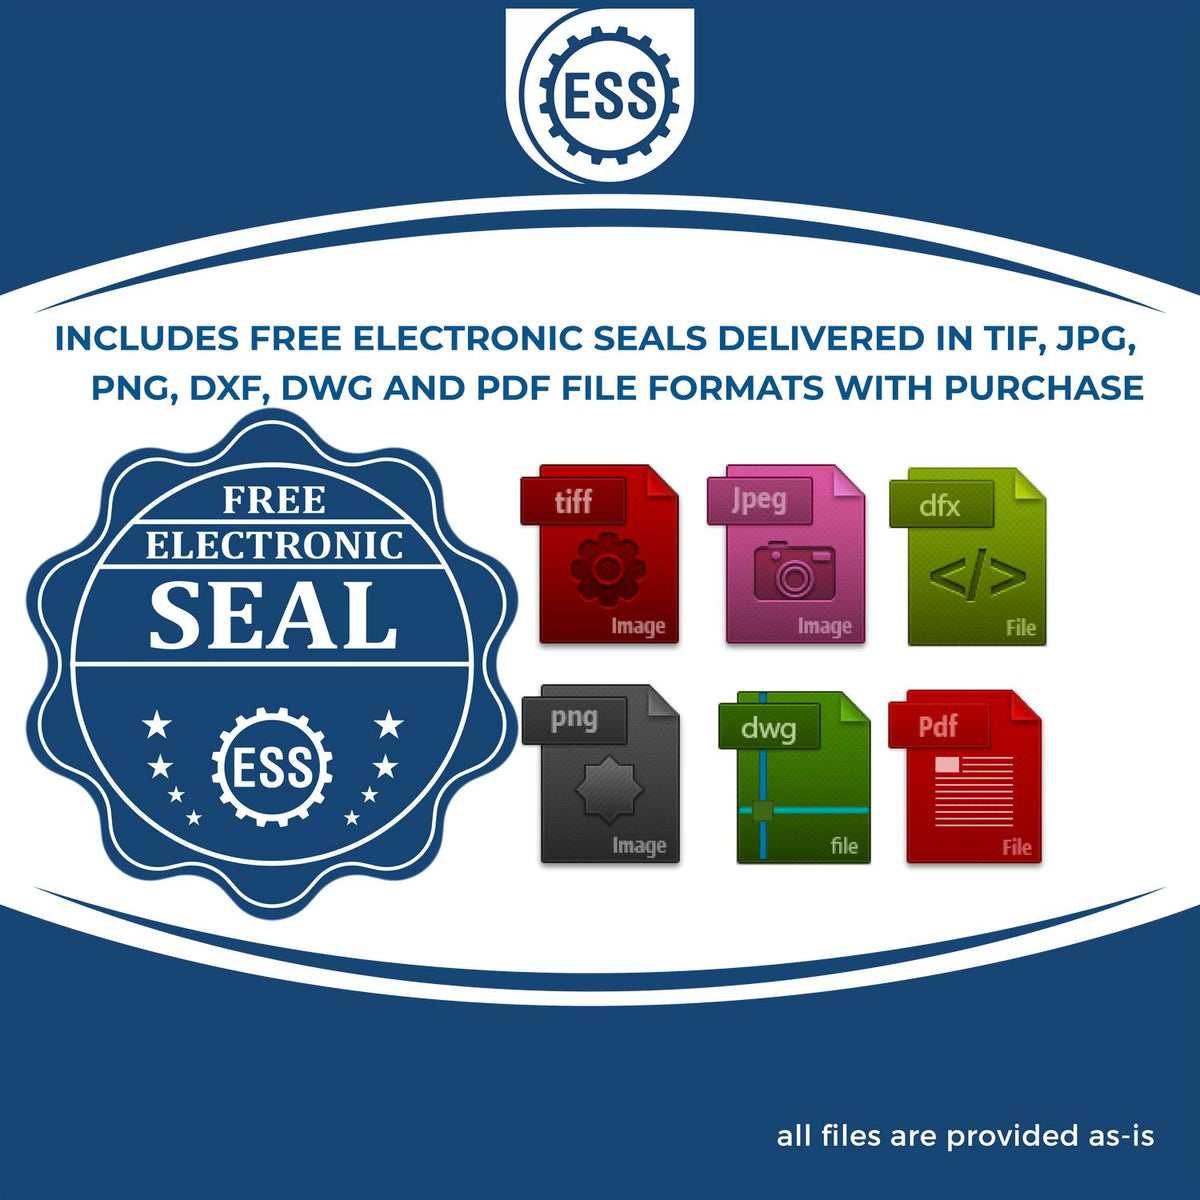 An infographic for the free electronic seal for the Slim Pre-Inked Oklahoma Professional Geologist Seal Stamp illustrating the different file type icons such as DXF, DWG, TIF, JPG and PNG.